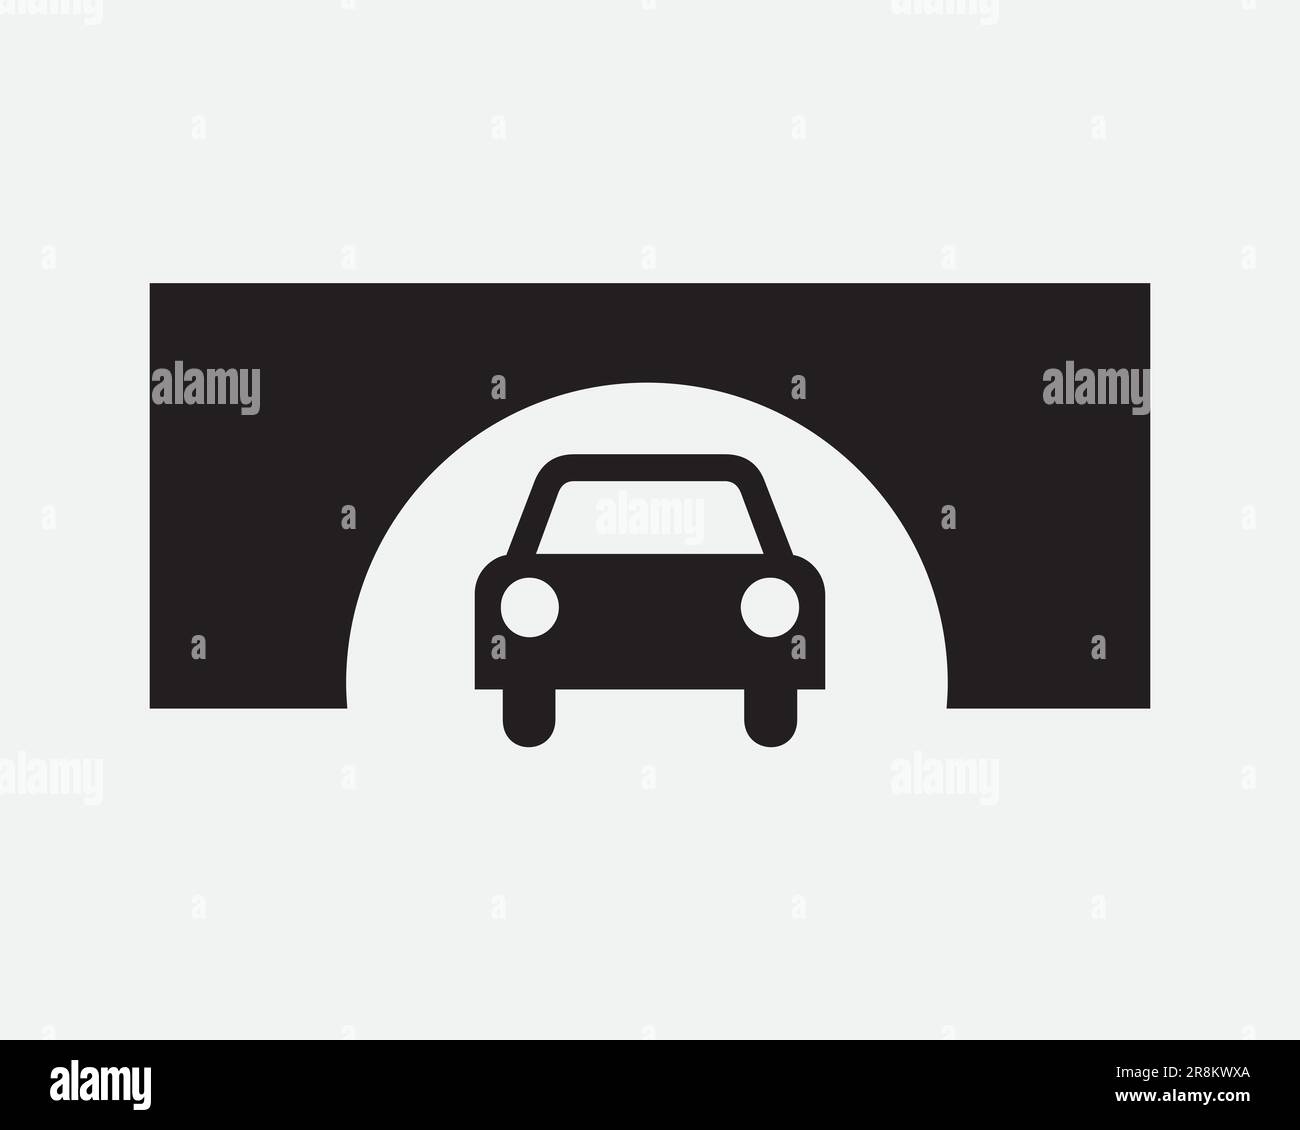 Car Tunnel Exit Icon. Arch Bridge Under Underneath Road Traffic Structure Black and White Sign Symbol Illustration Artwork Graphic Clipart EPS Vector Stock Vector